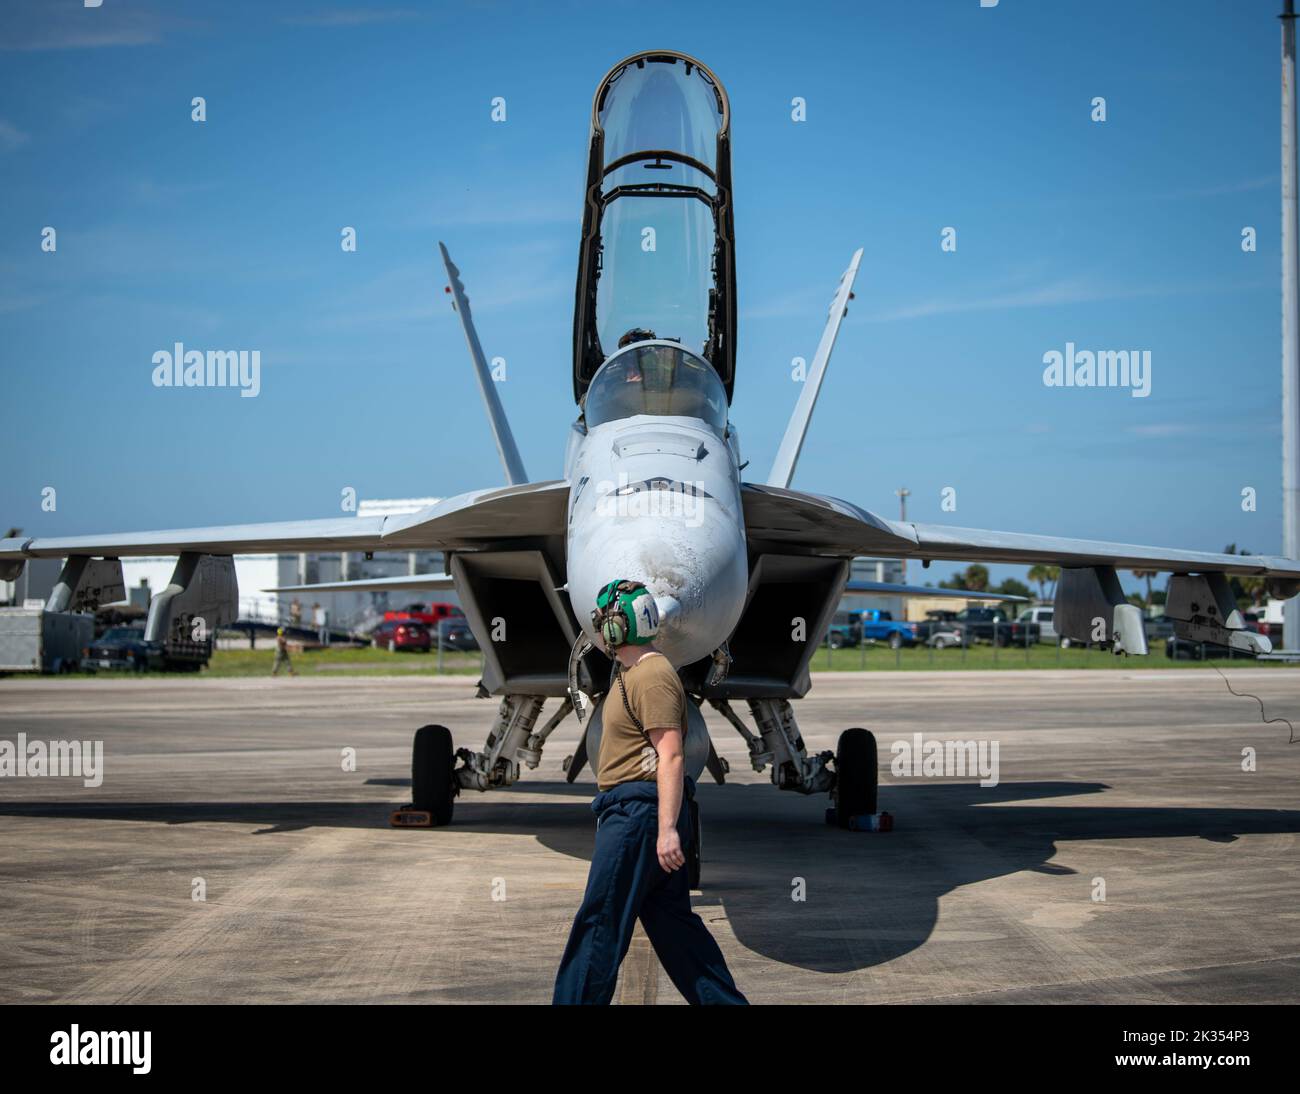 A U.S. Sailor with Strike Fighter Squadron (VFA) 2, Naval Air Station Lemoore, California, walks around an an F/A-18 Super Hornet for post-flight recovery during Weapons System Evaluation Program-East 22.12 at Tyndall Air Force Base, Florida, Sept. 12, 2022. WSEP-E 22.12 is a formal, two-week evaluation exercise designed to test a squadron’s capabilities to conduct live-fire weapons systems during air-to-air combat training missions. (U.S. Air Force photo by Senior Airman Jacob Dastas) Stock Photo